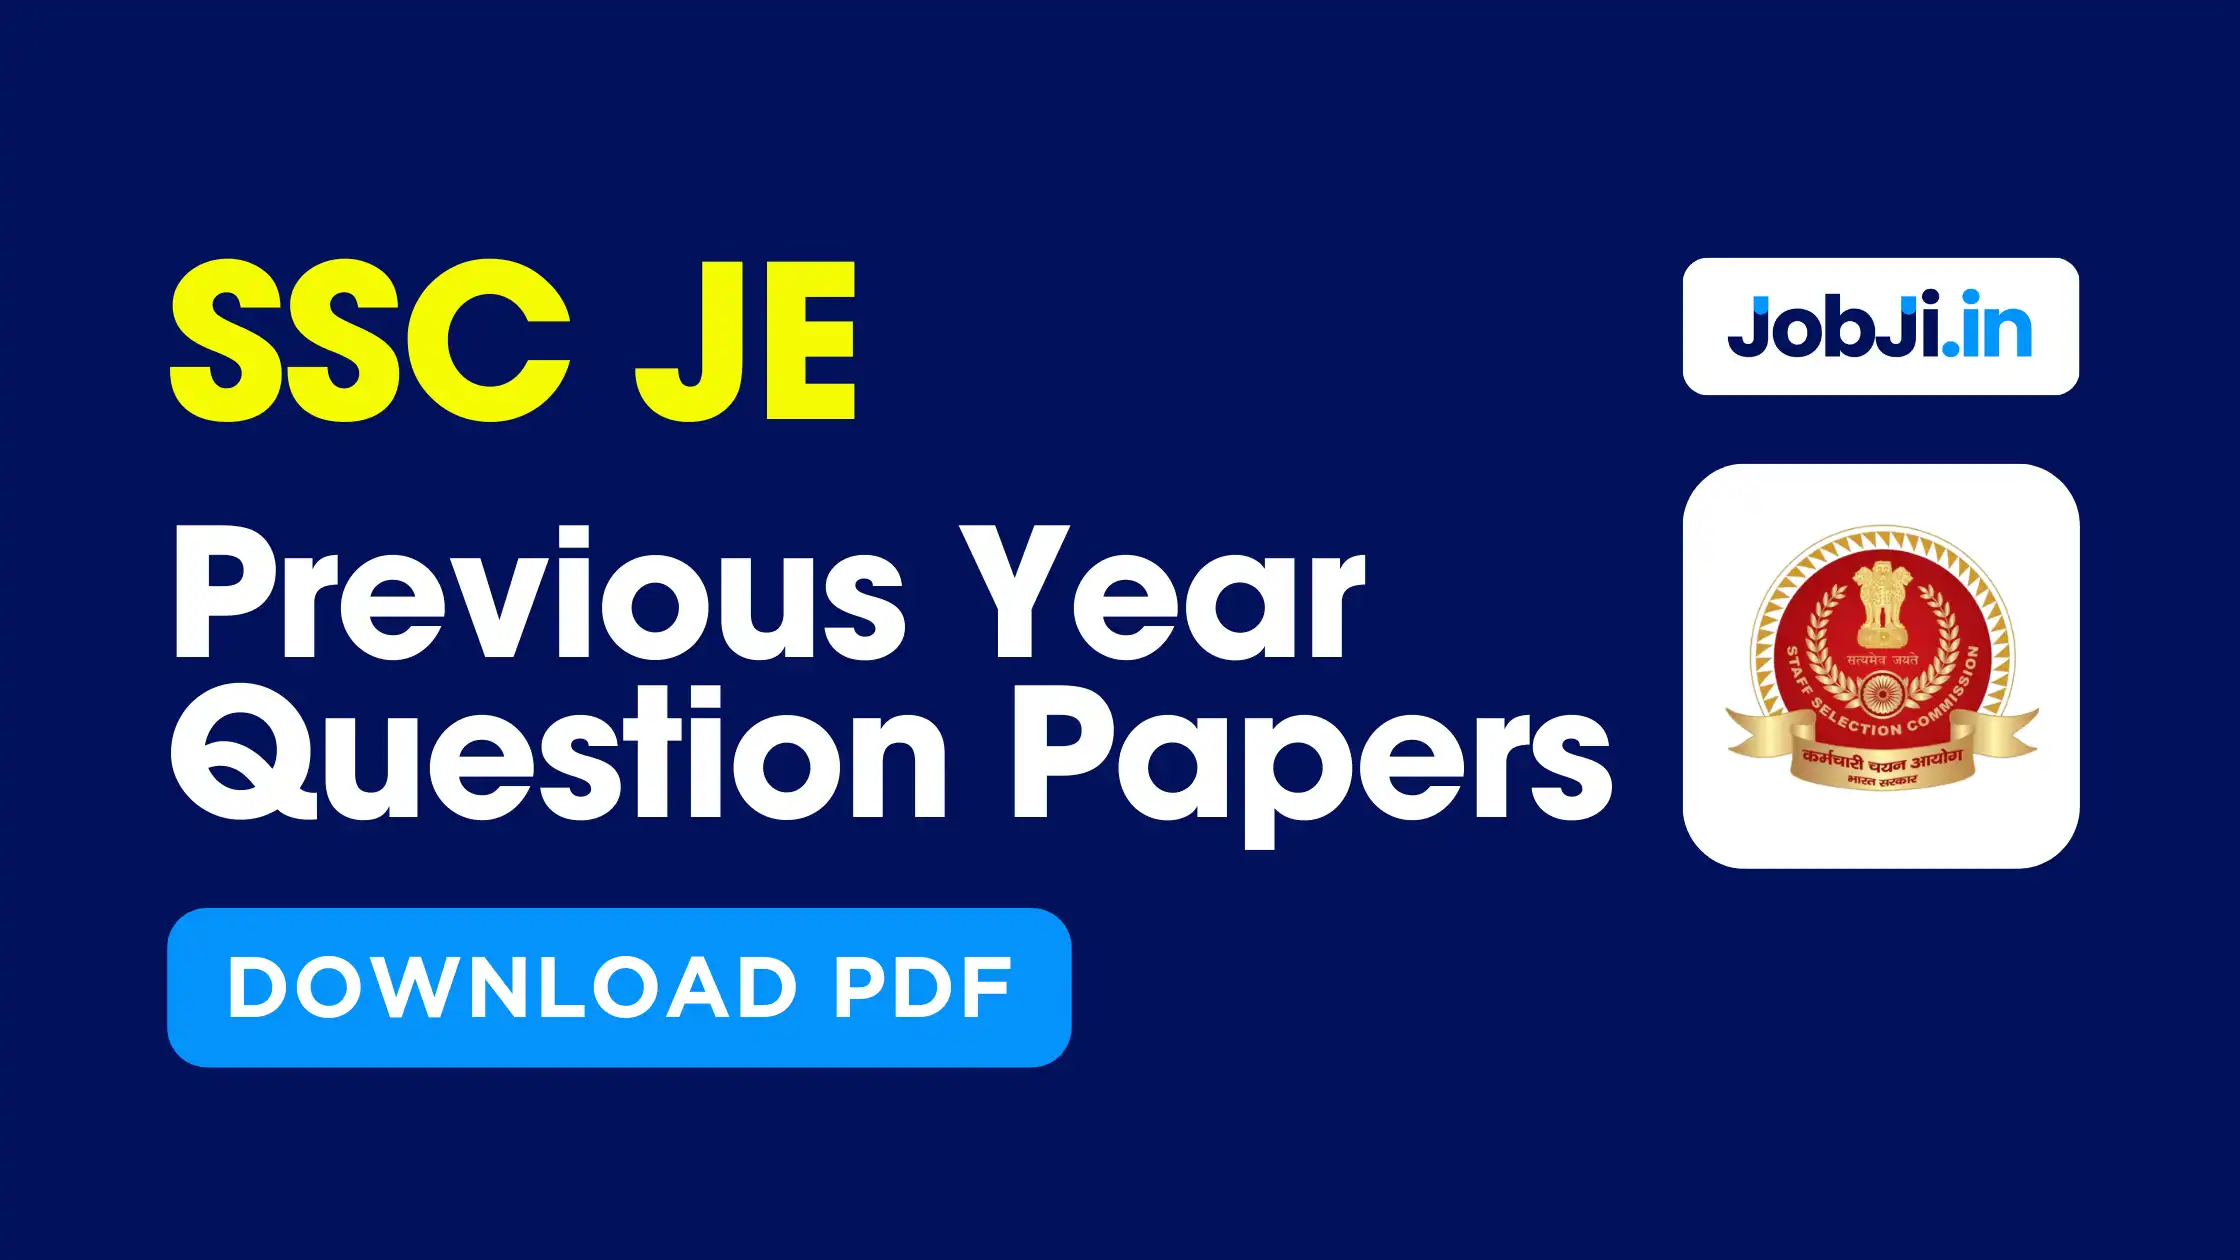 SSC JE previous year question papers